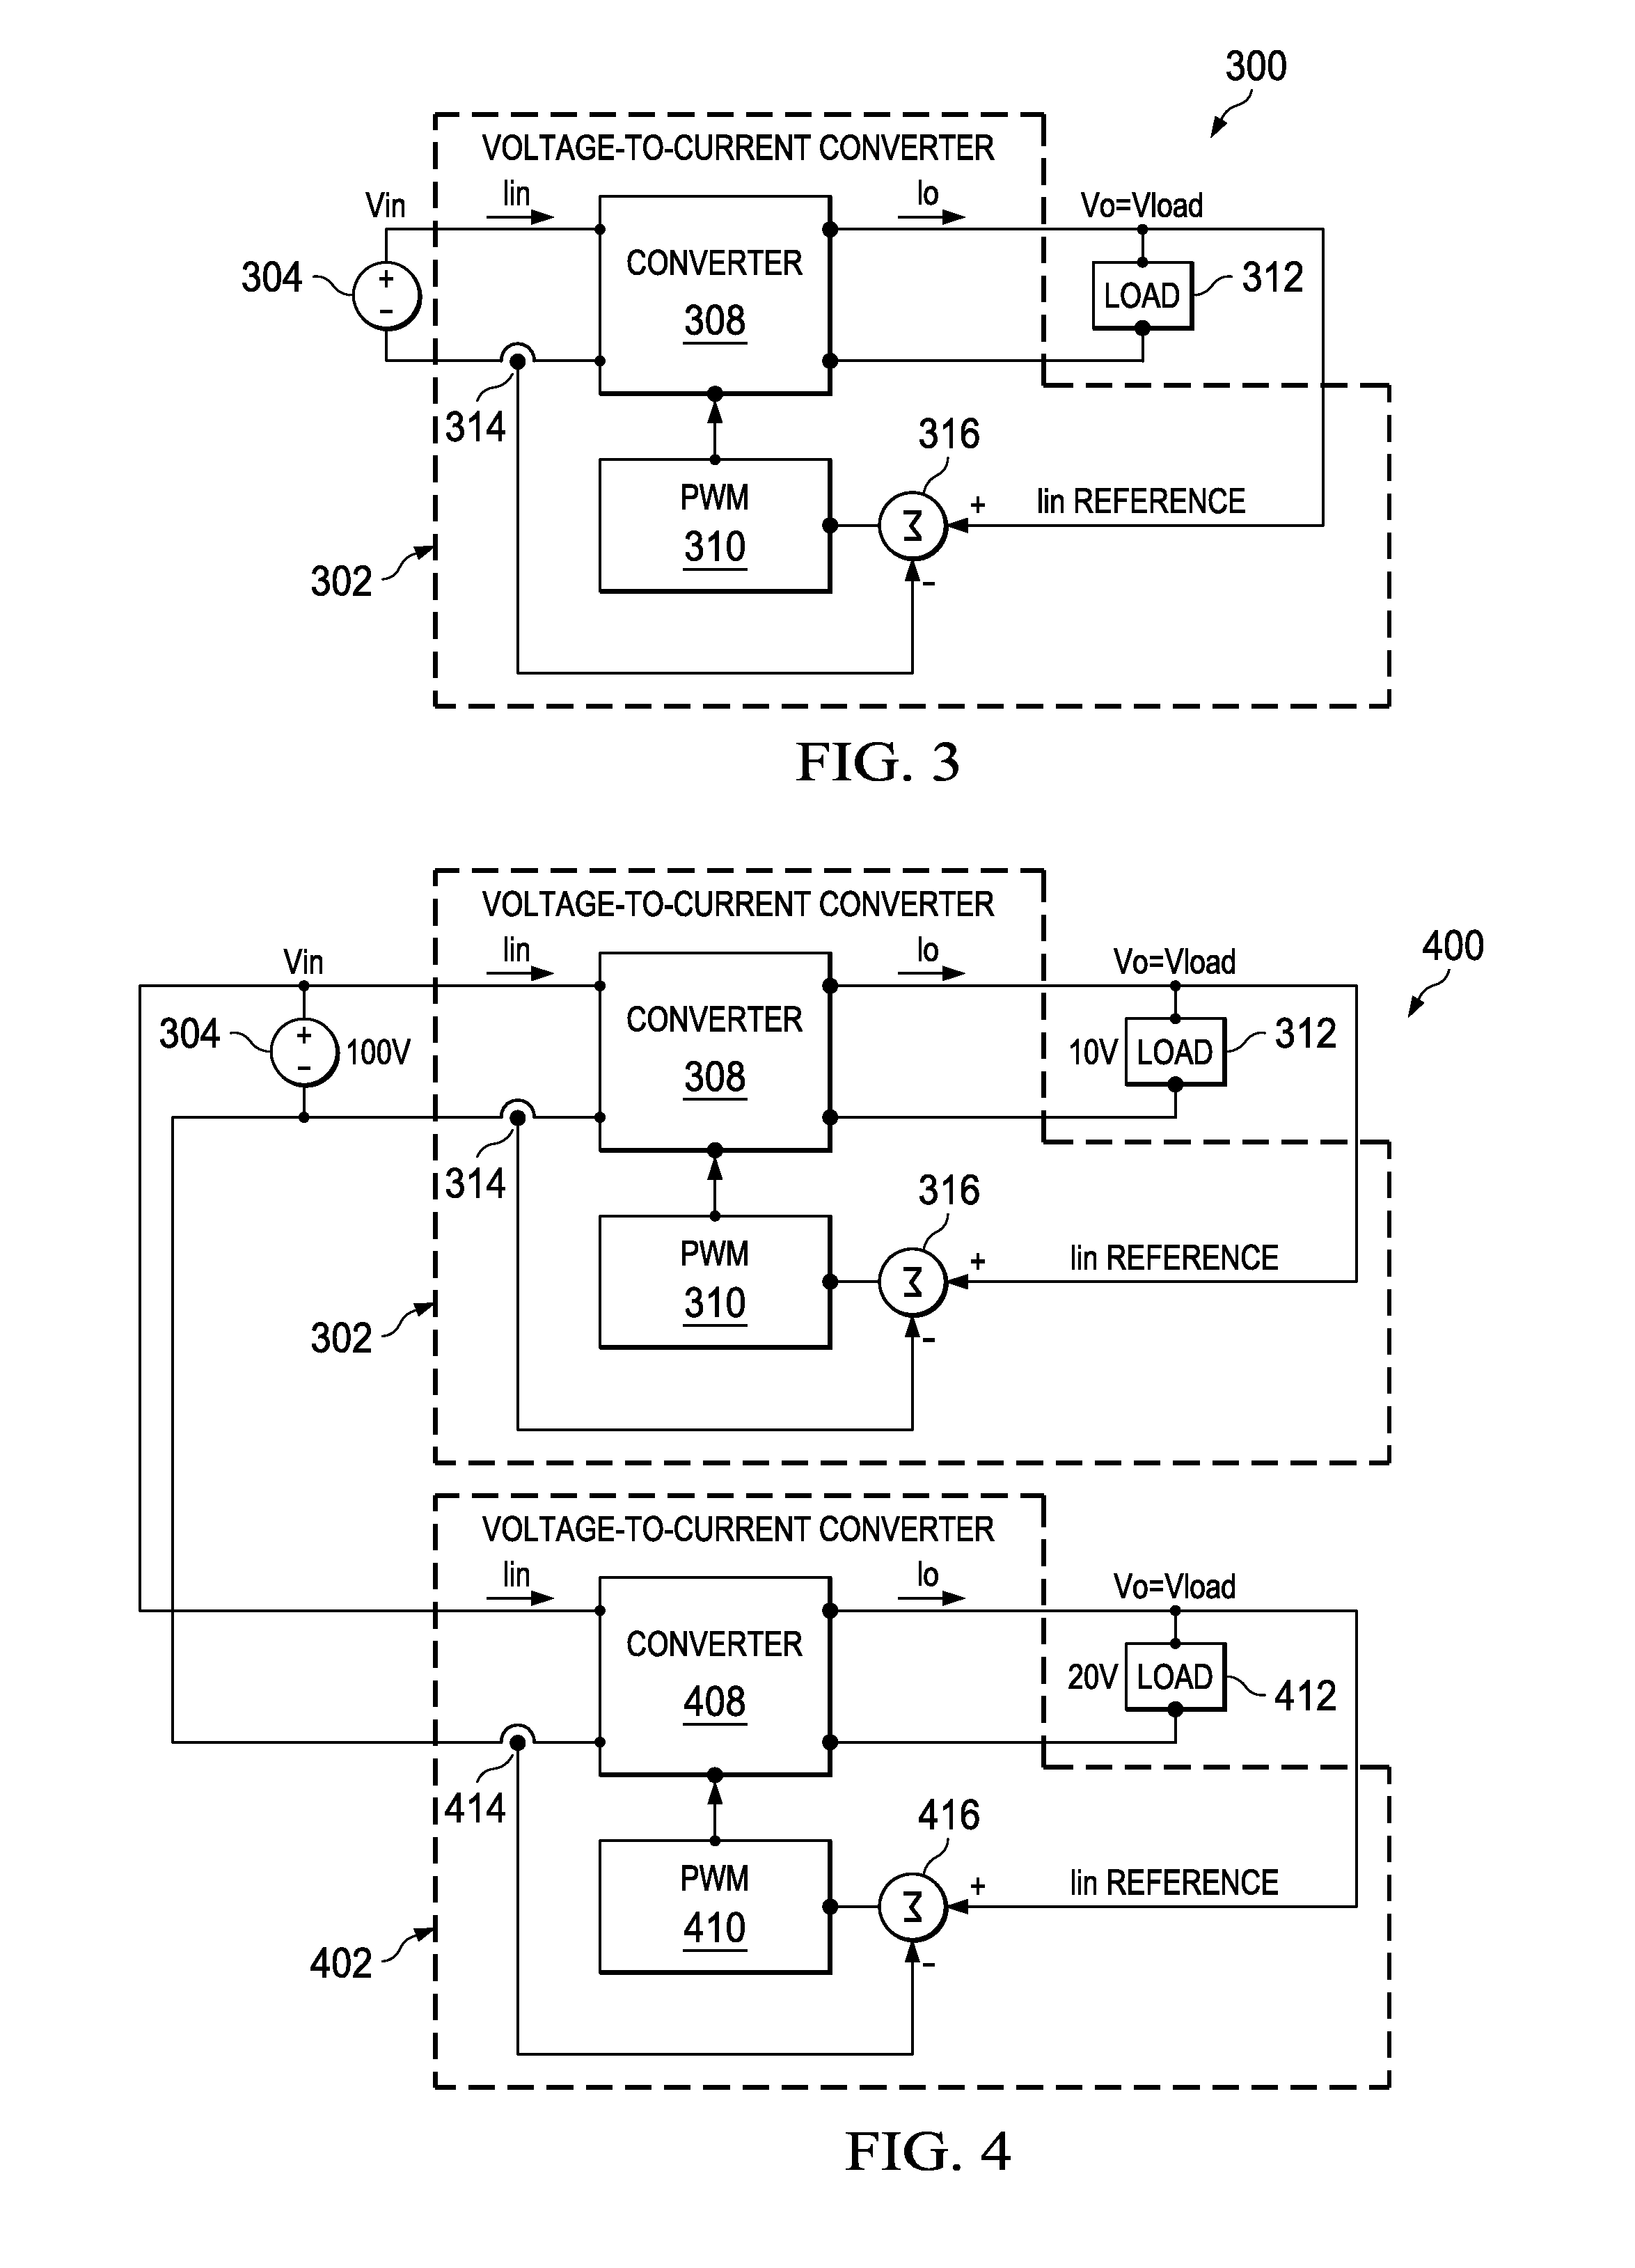 Feed forward controlled voltage to current source for LED driver